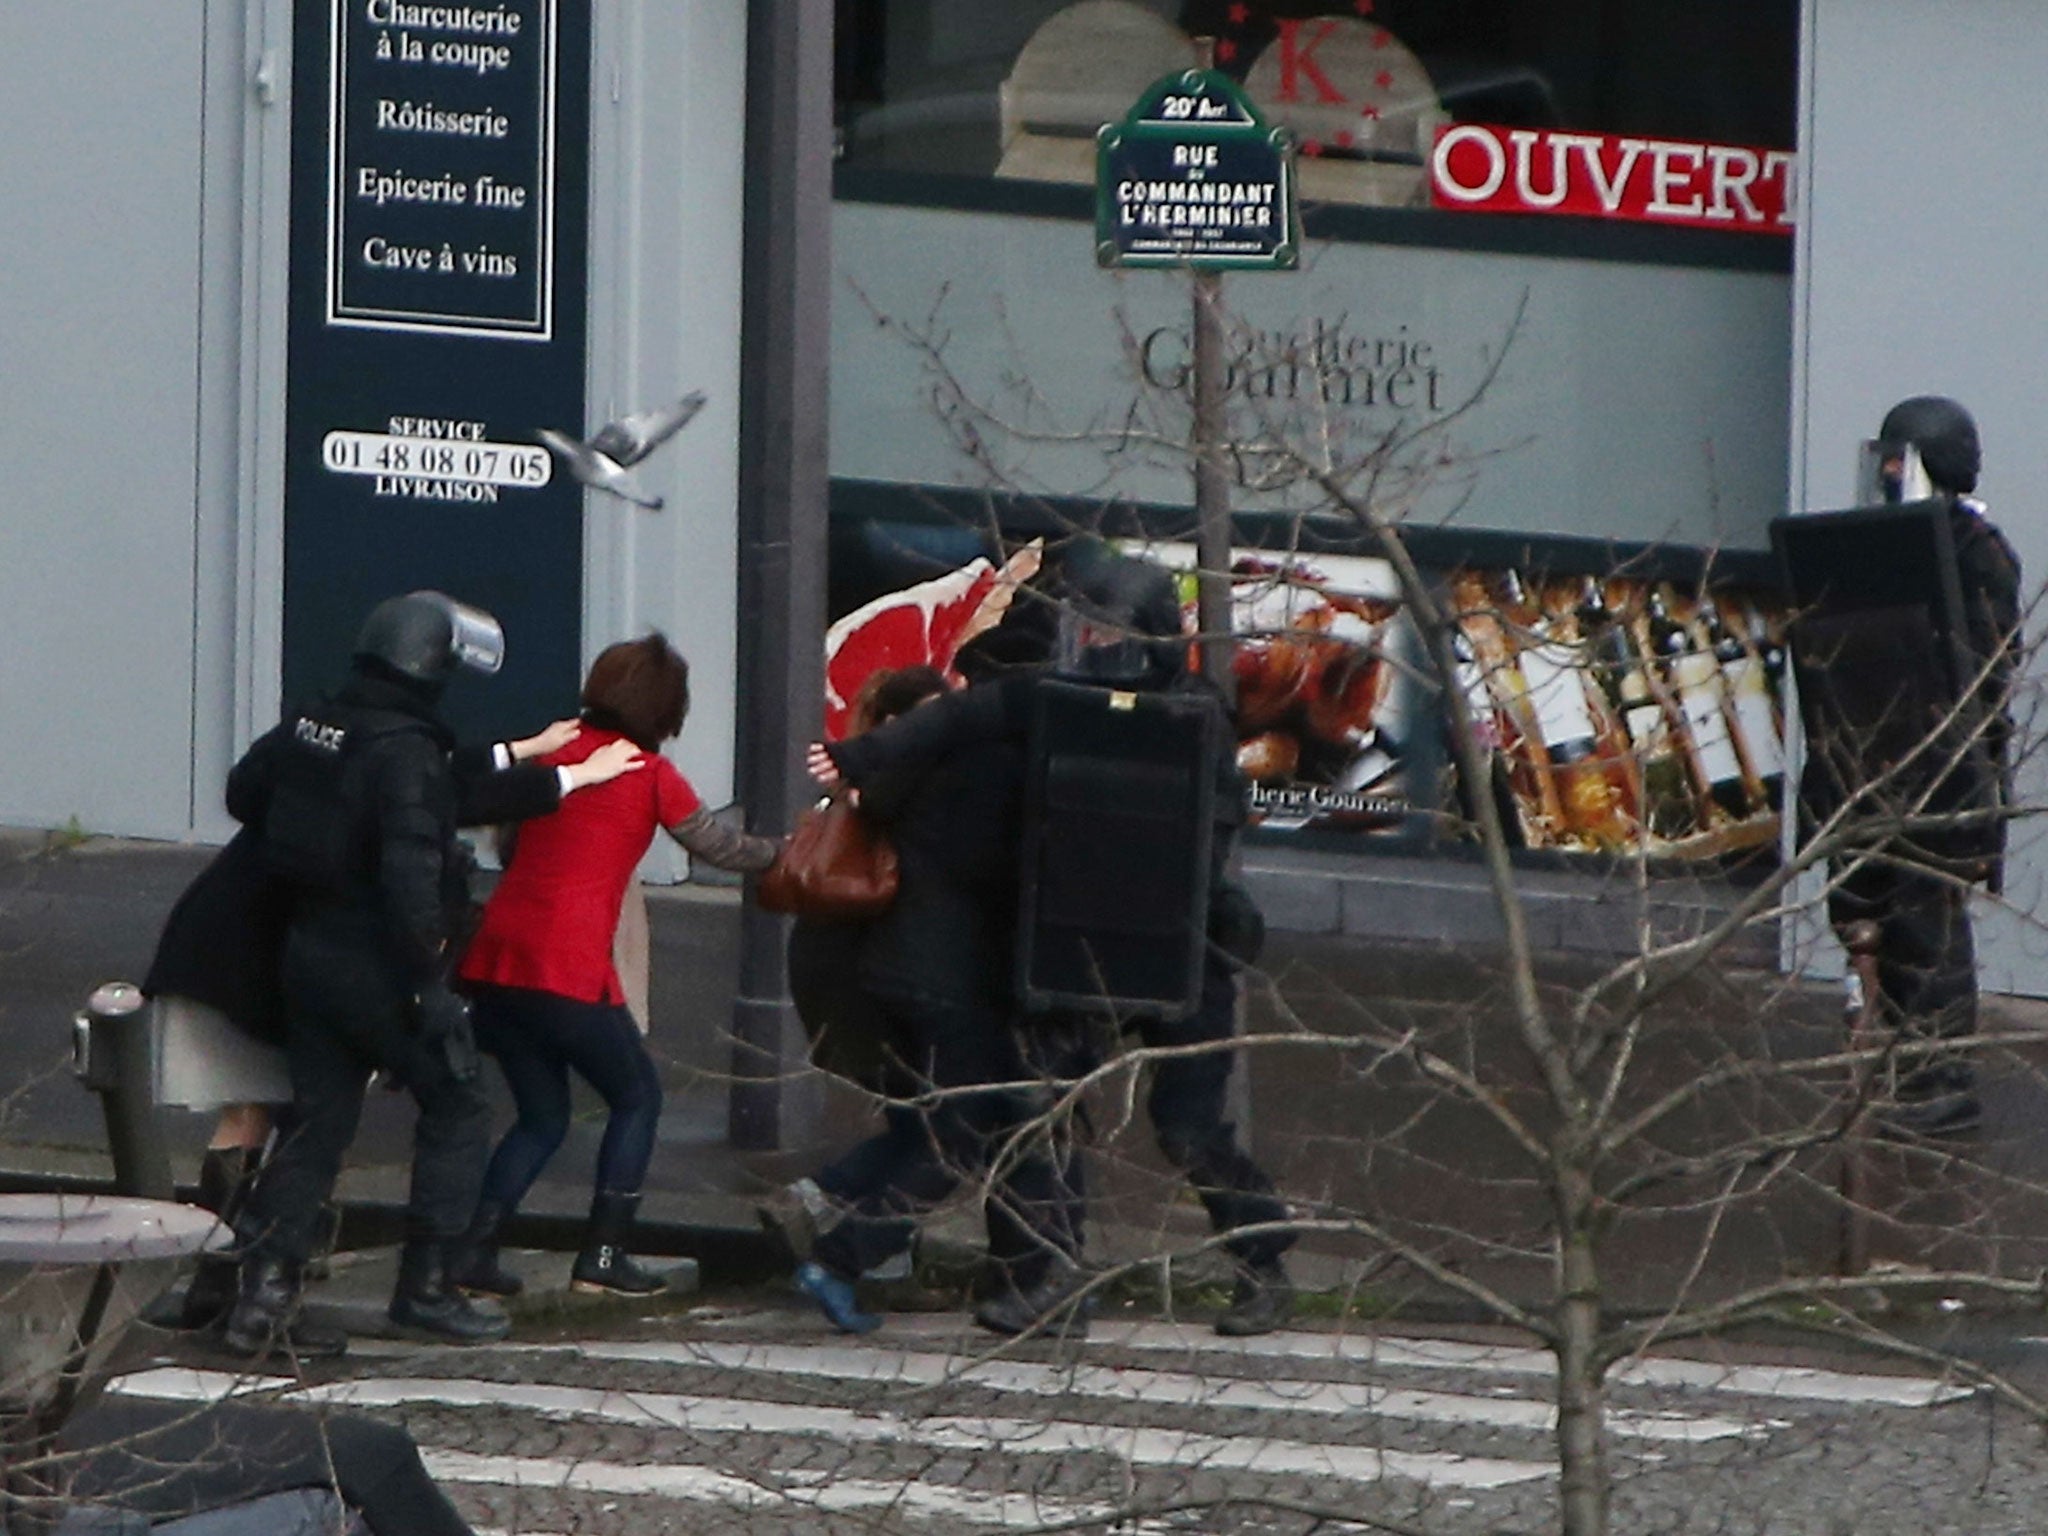 Amedy Coulibaly called BMFTV while he held hostages in a kosher grocery store in Paris